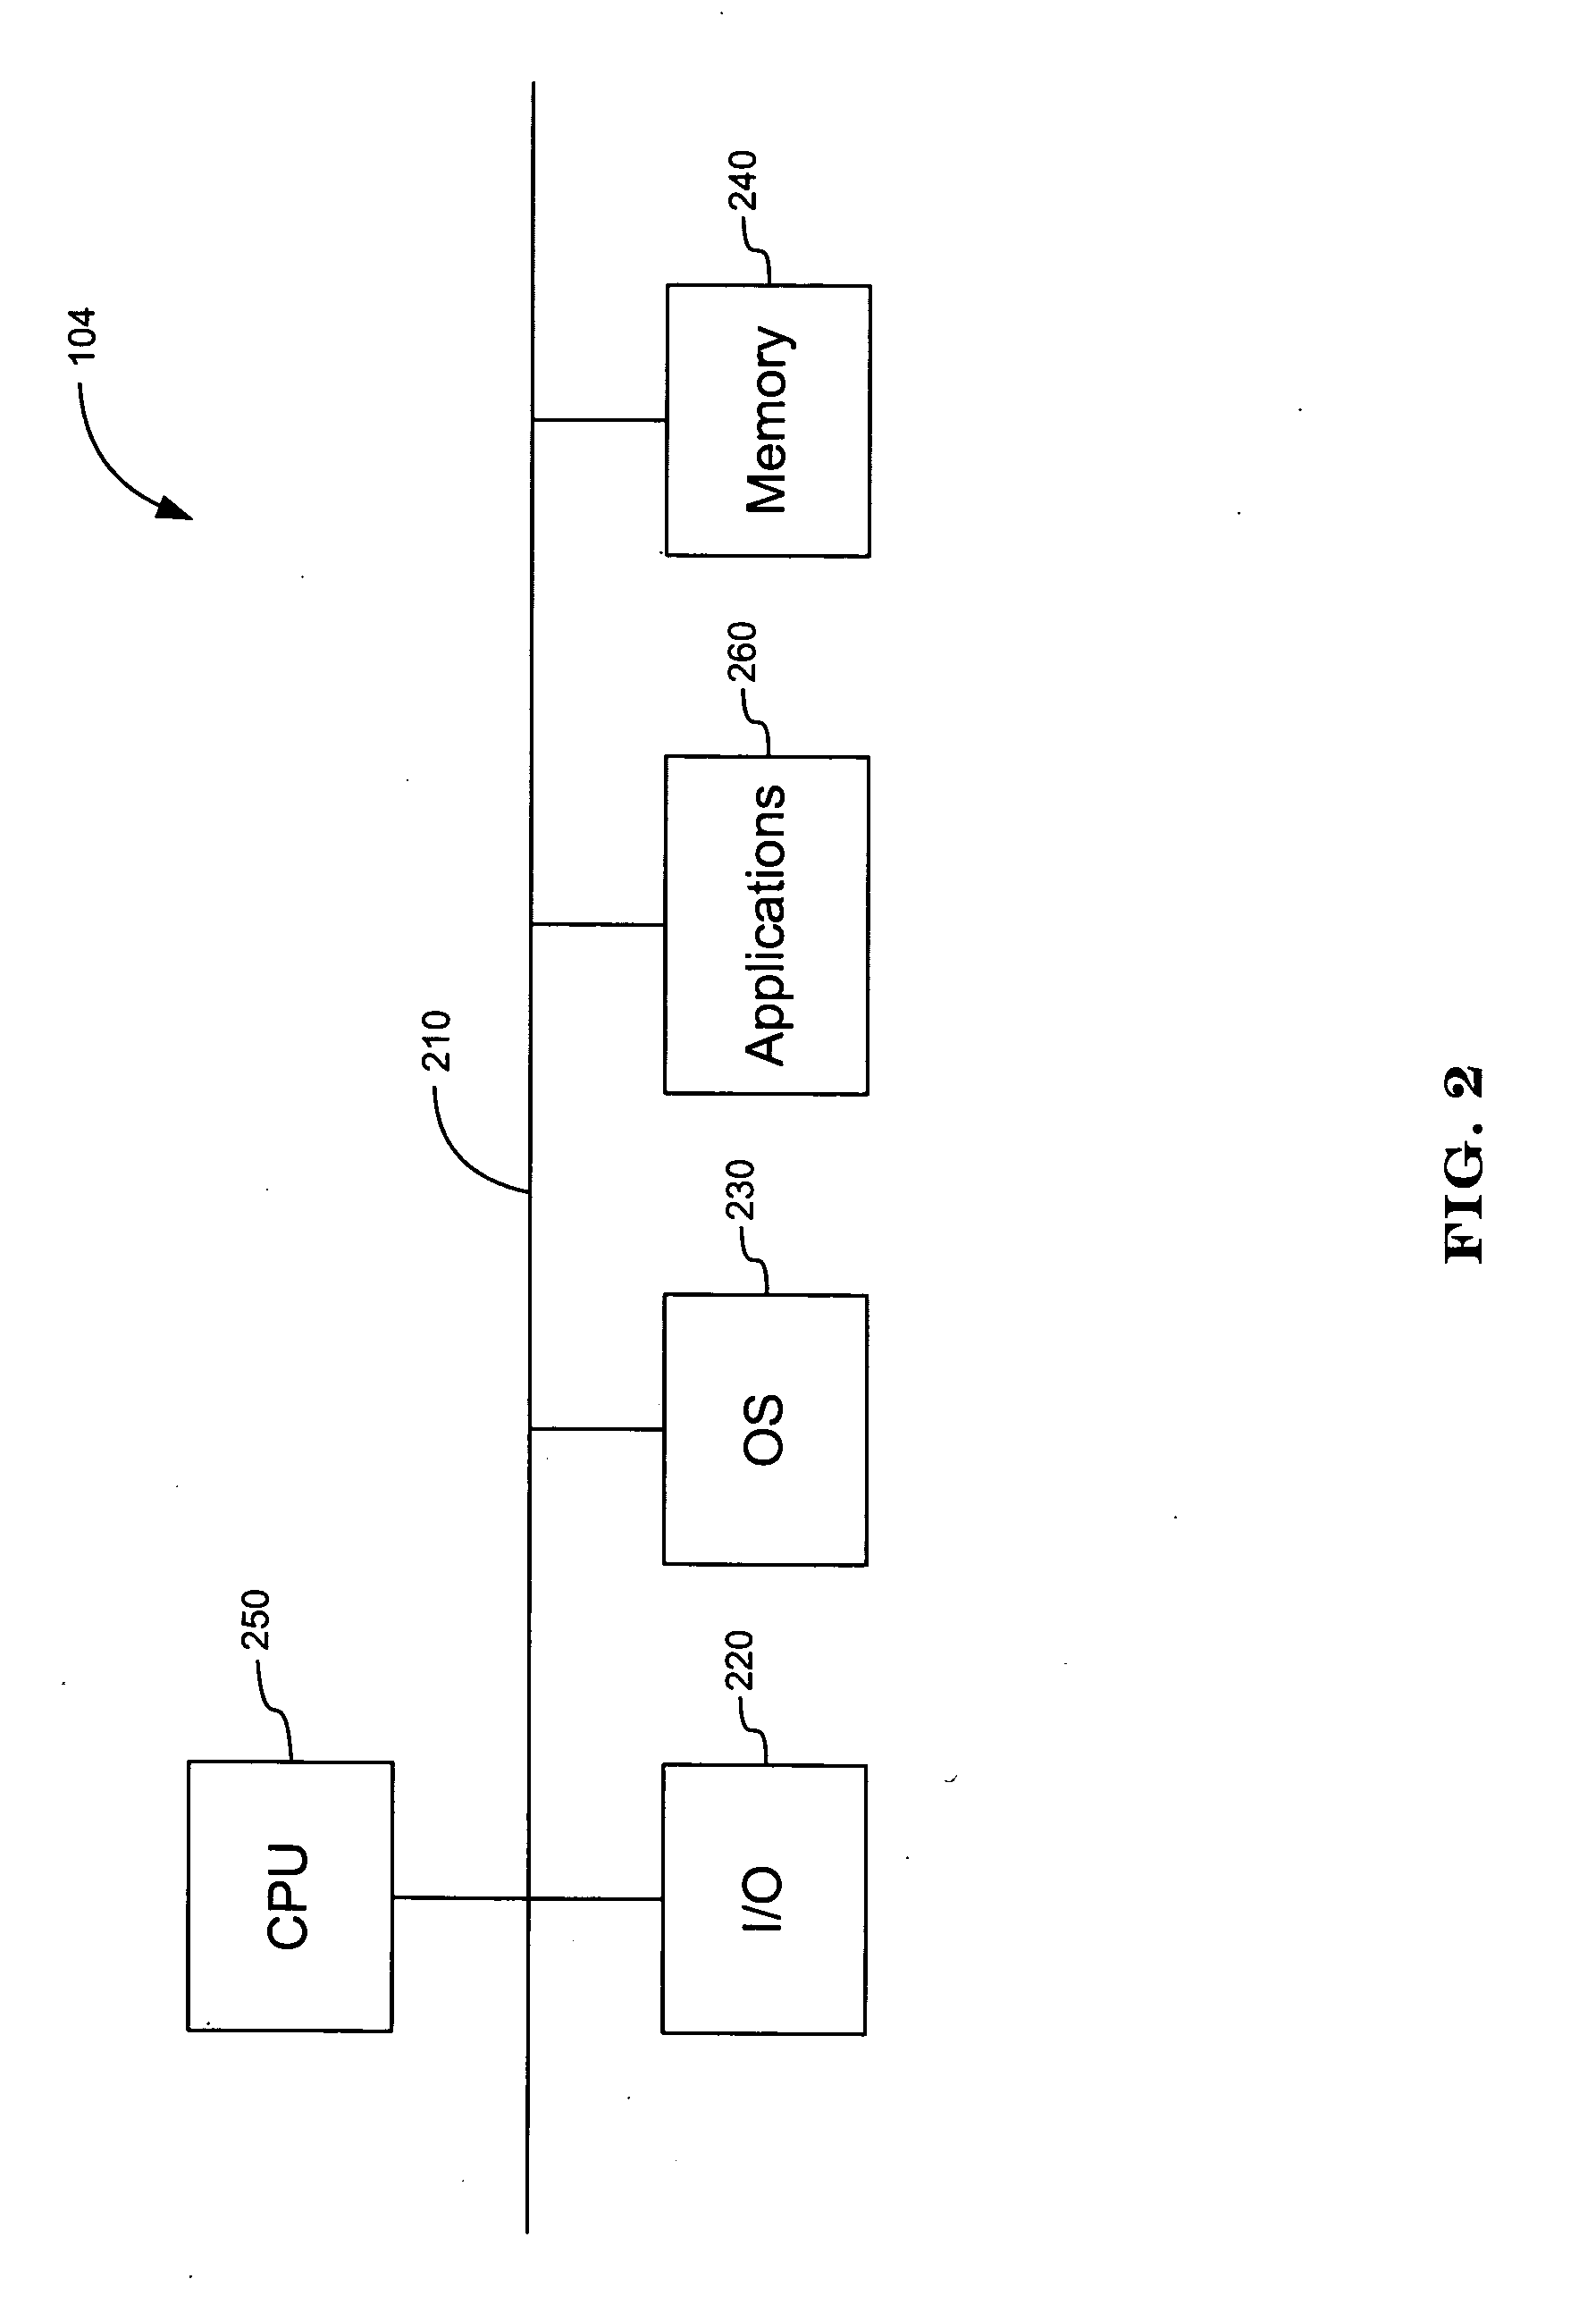 Method and apparatus for automated tomography inspection